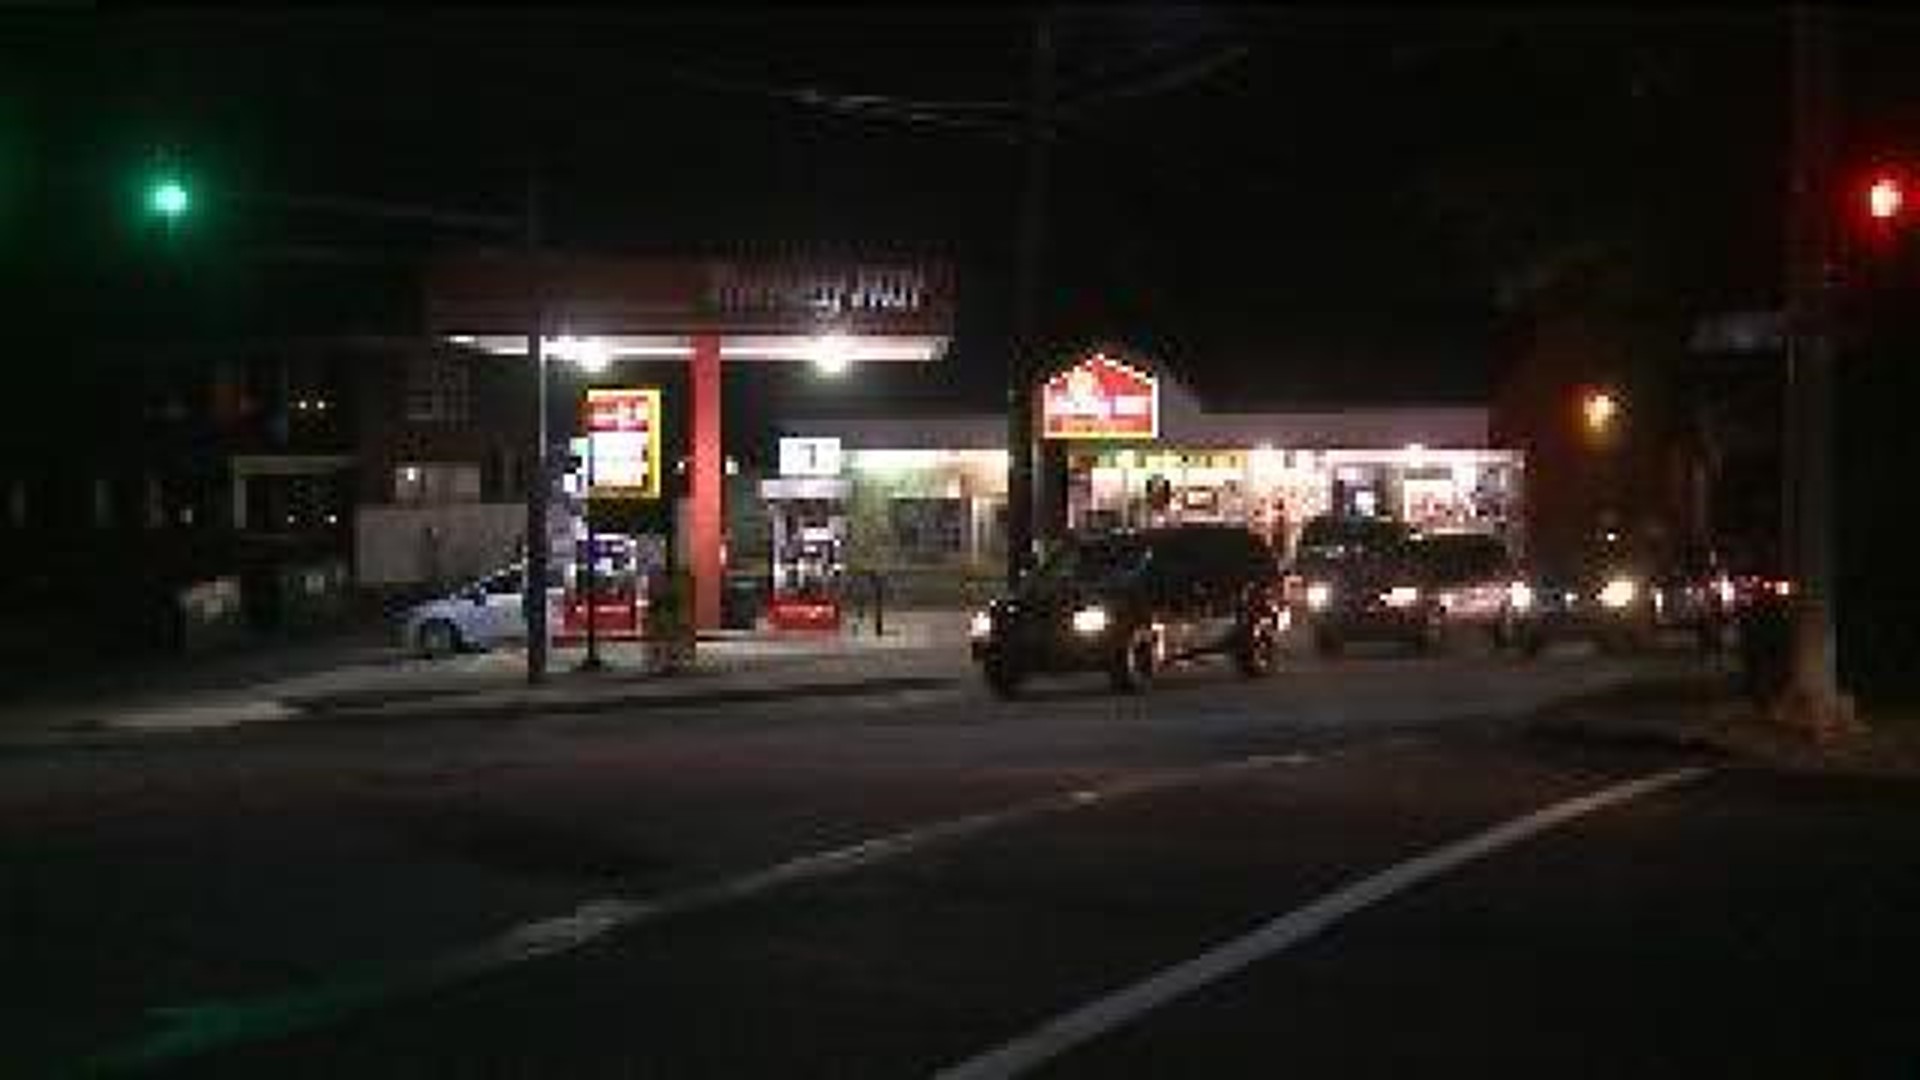 Police Search for Robber in Wilkes-Barre